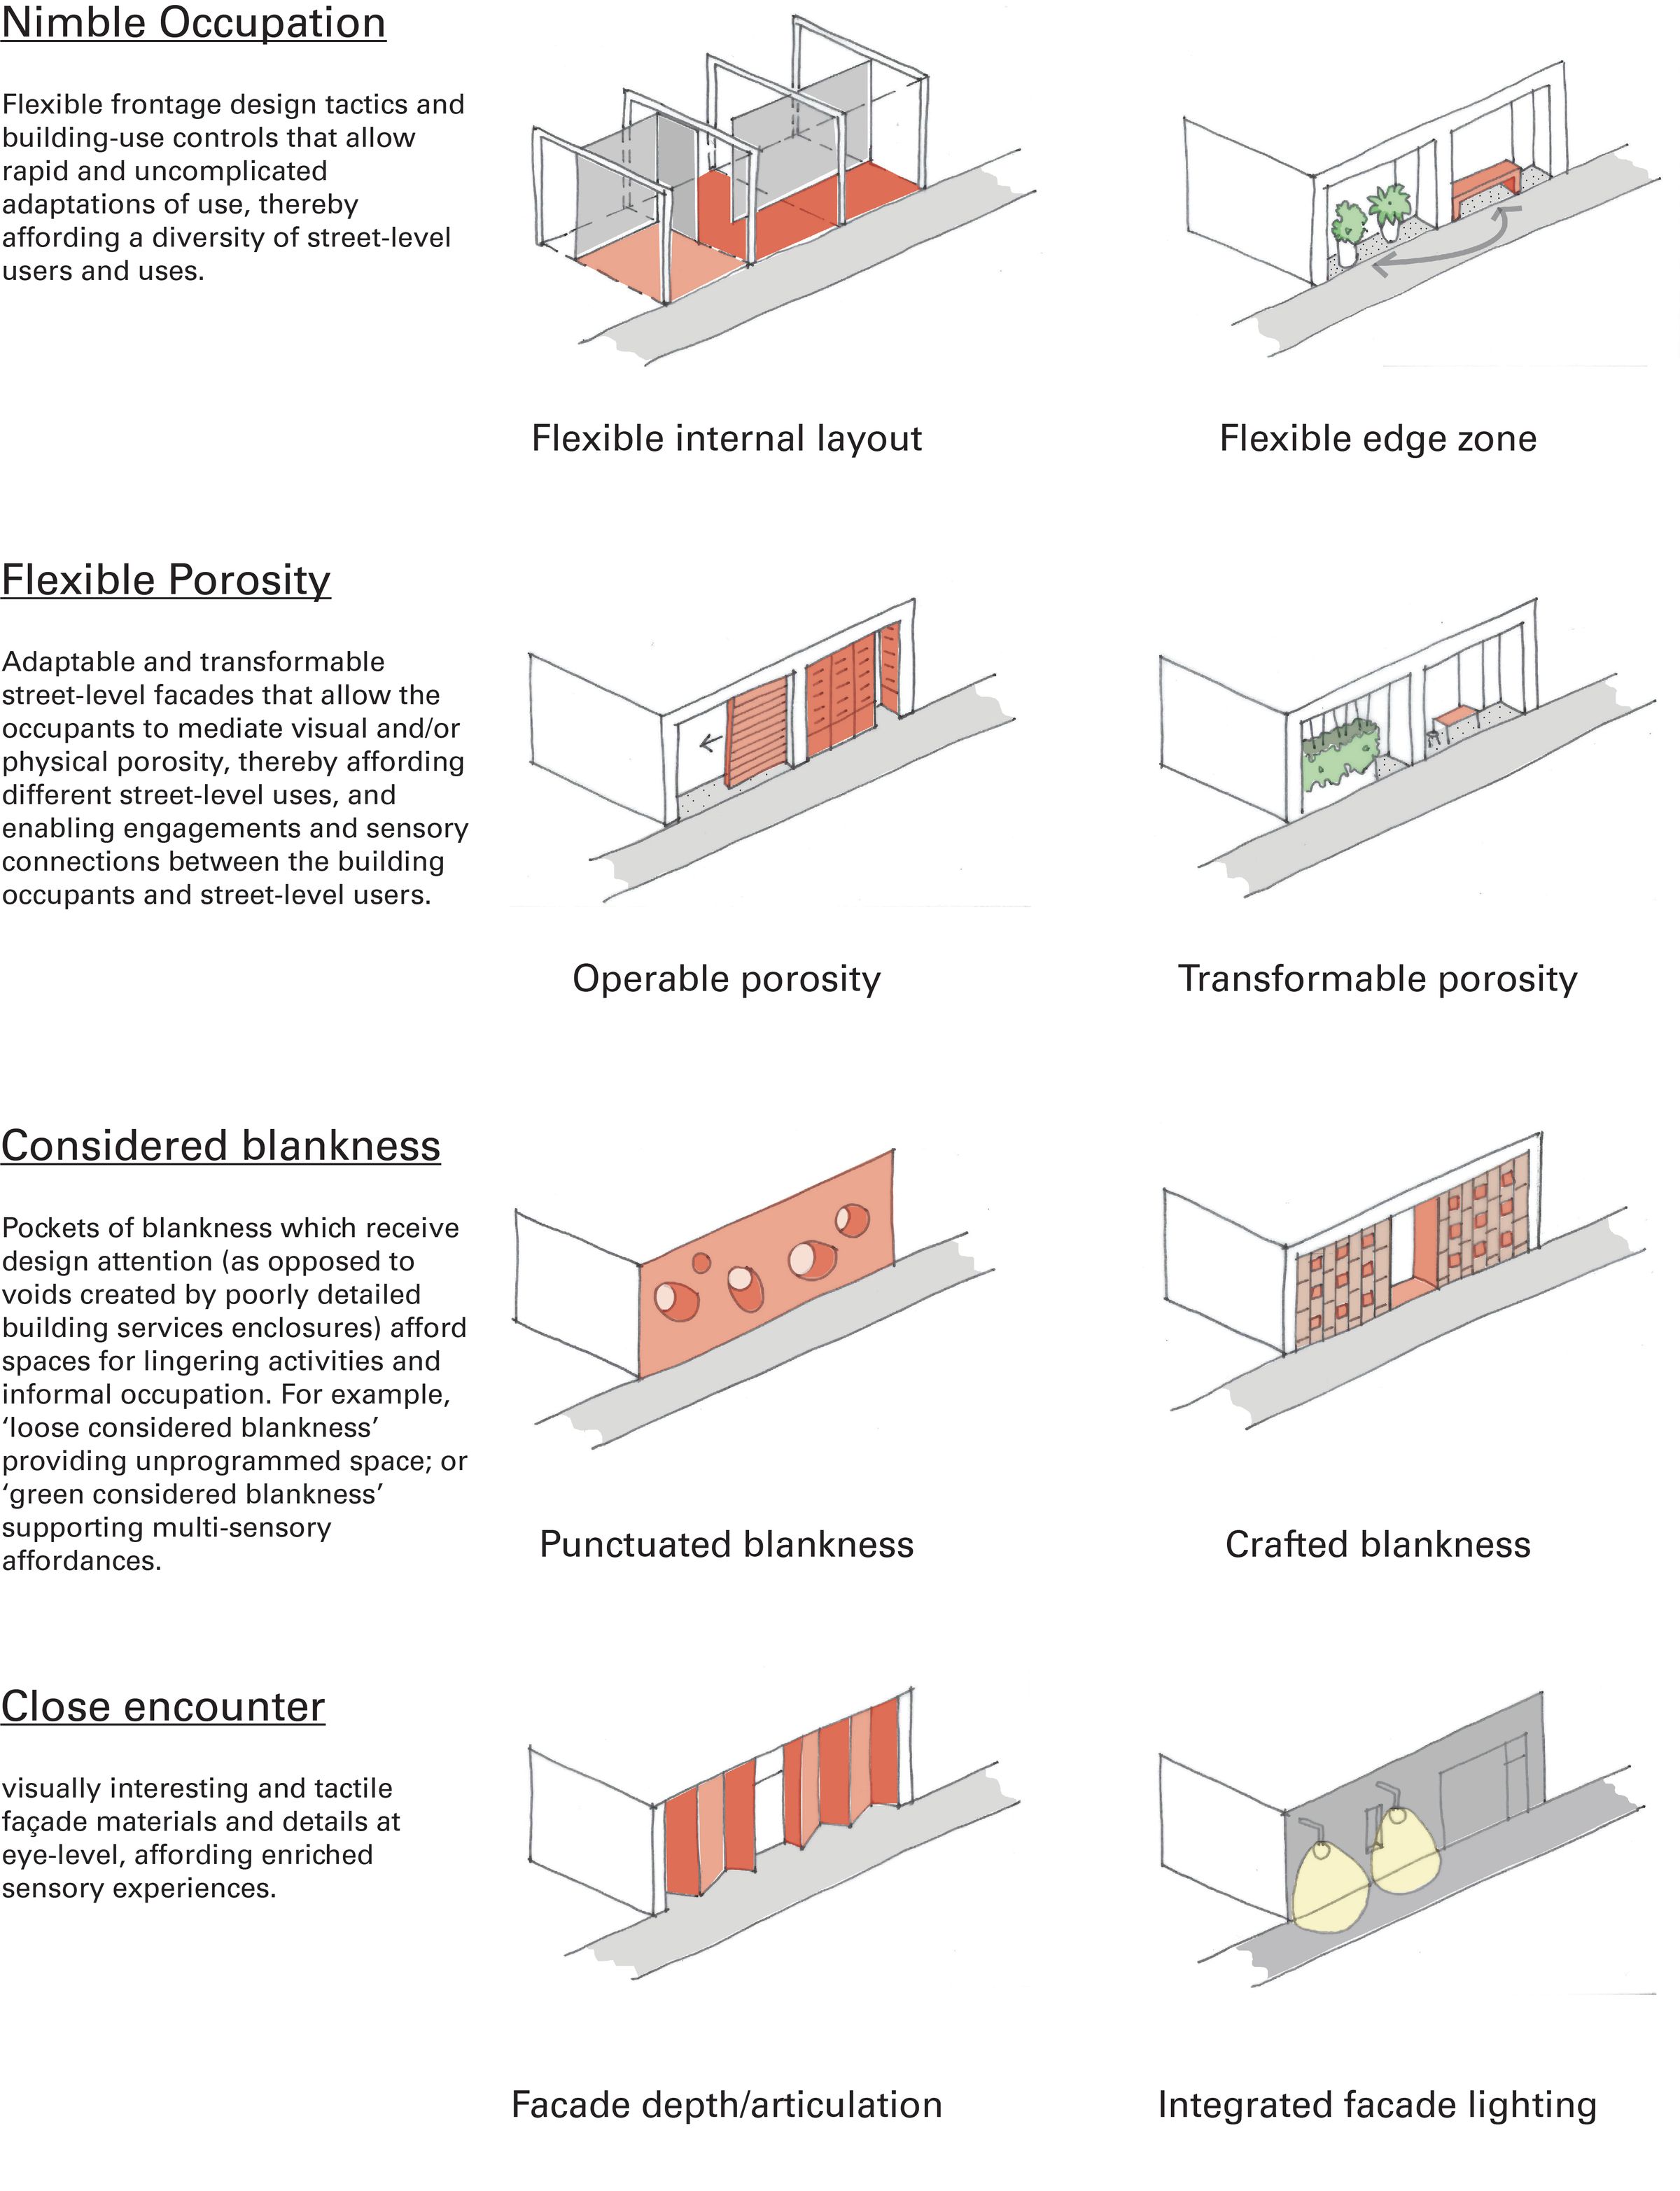 8 design principles for façade design. These include: flexible internal layout, flexible edge zone, operable porosity, transformable porosity, punctuated blankness, crafted blankness, facade depth/articulation and integrated facade lighting.